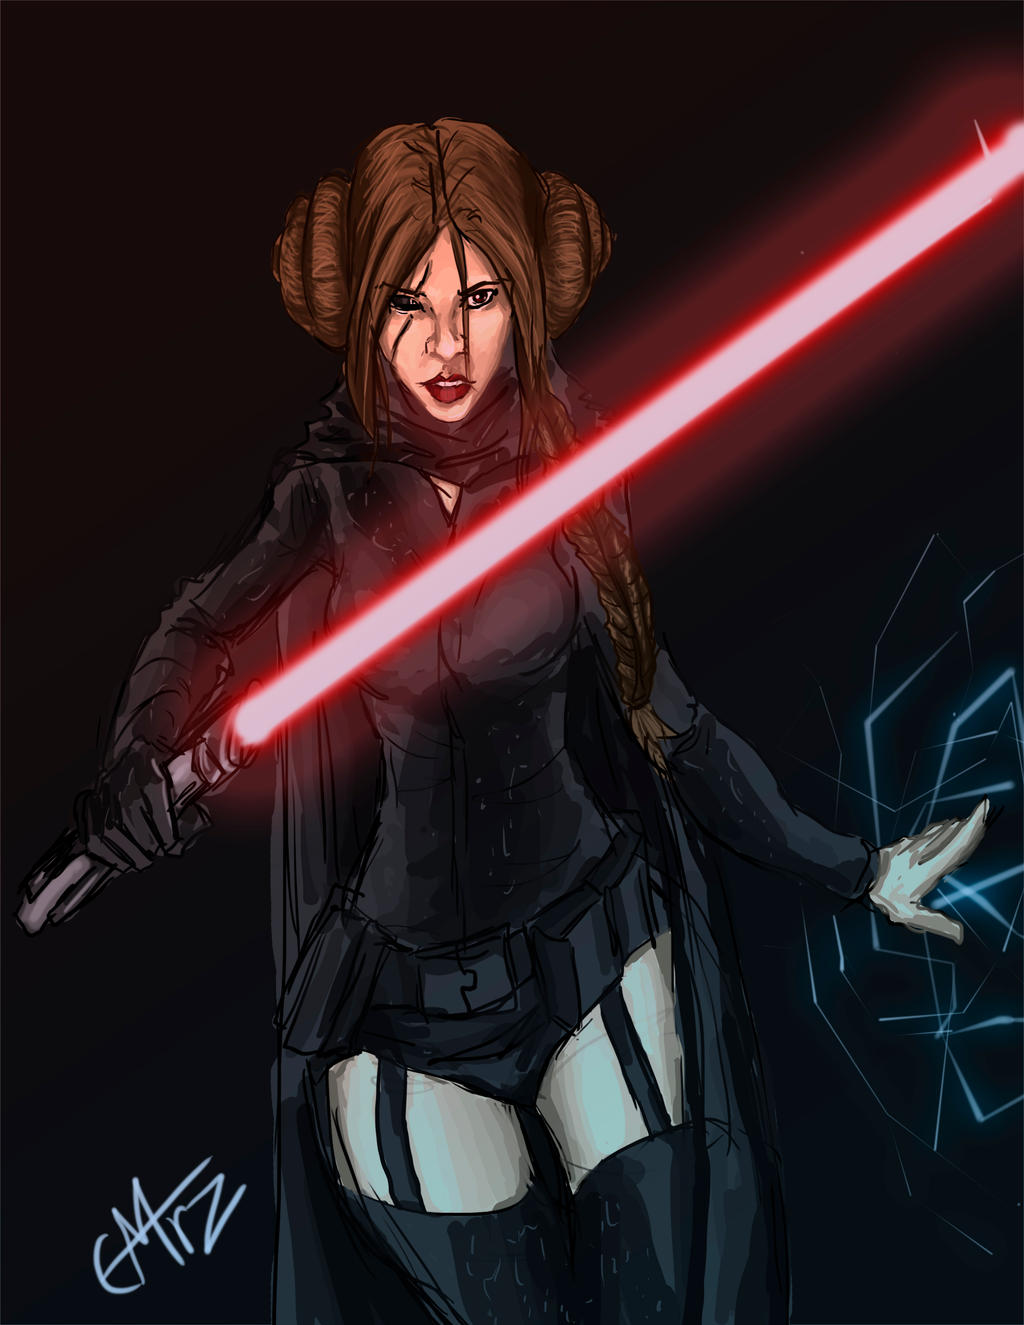 Leia Vader By Alazoso On DeviantArt.